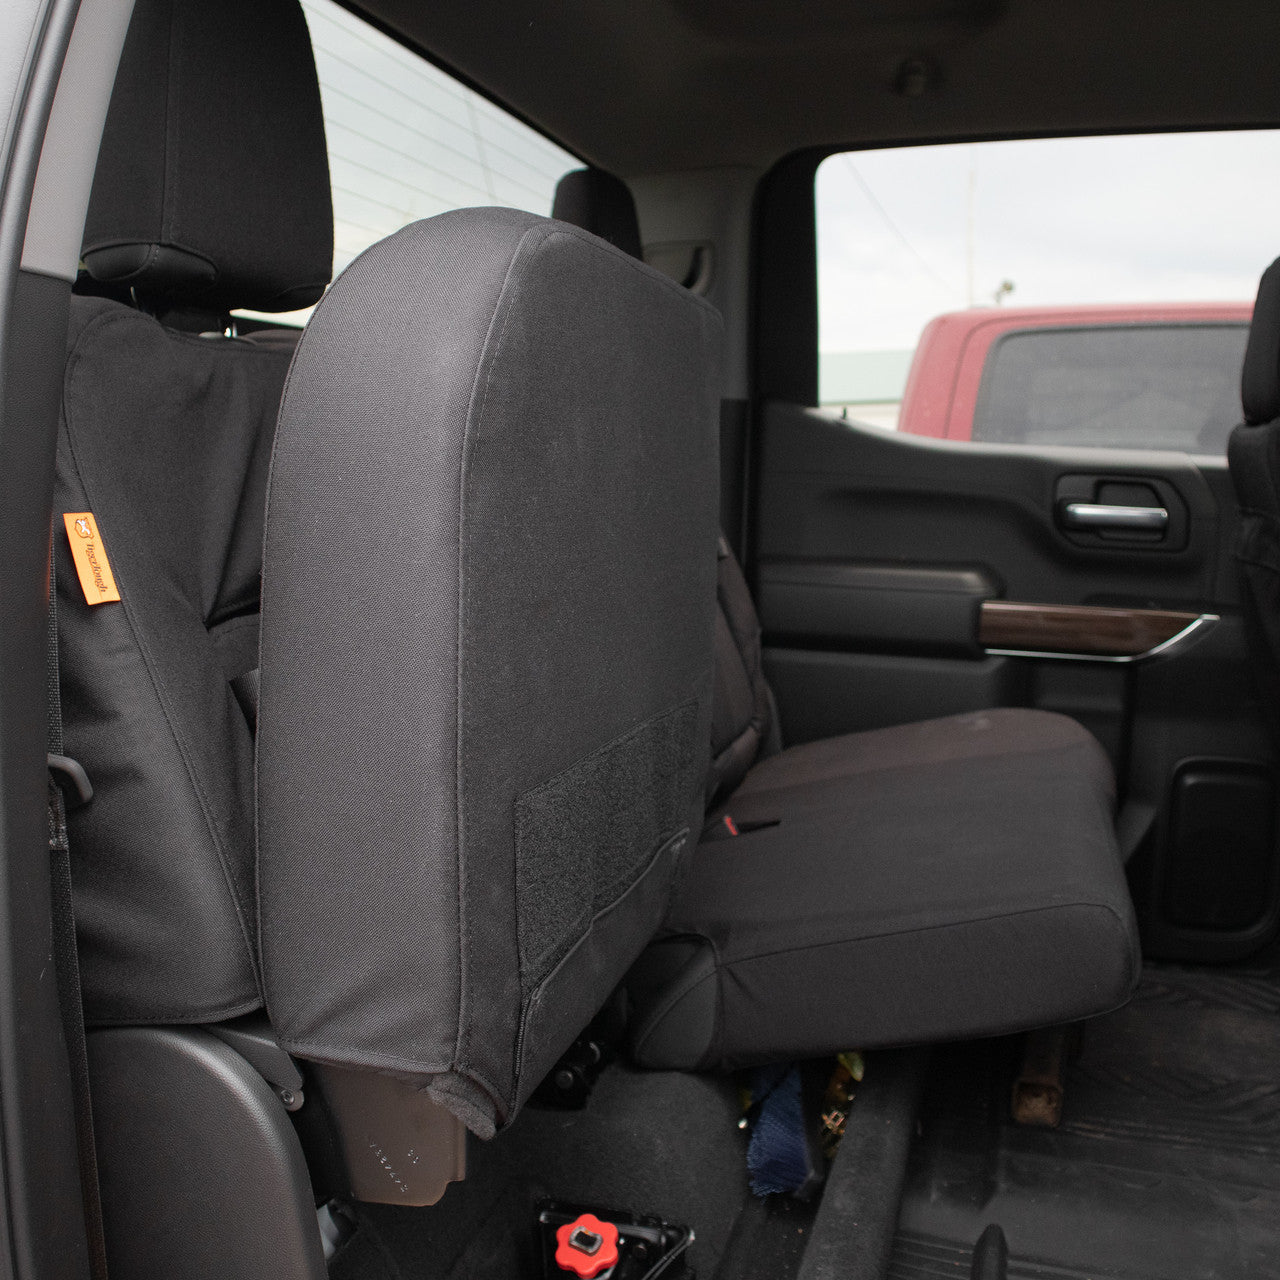 2021 Chevy Silverado Rear Seat with Black Ironweave TigerTough seat covers.